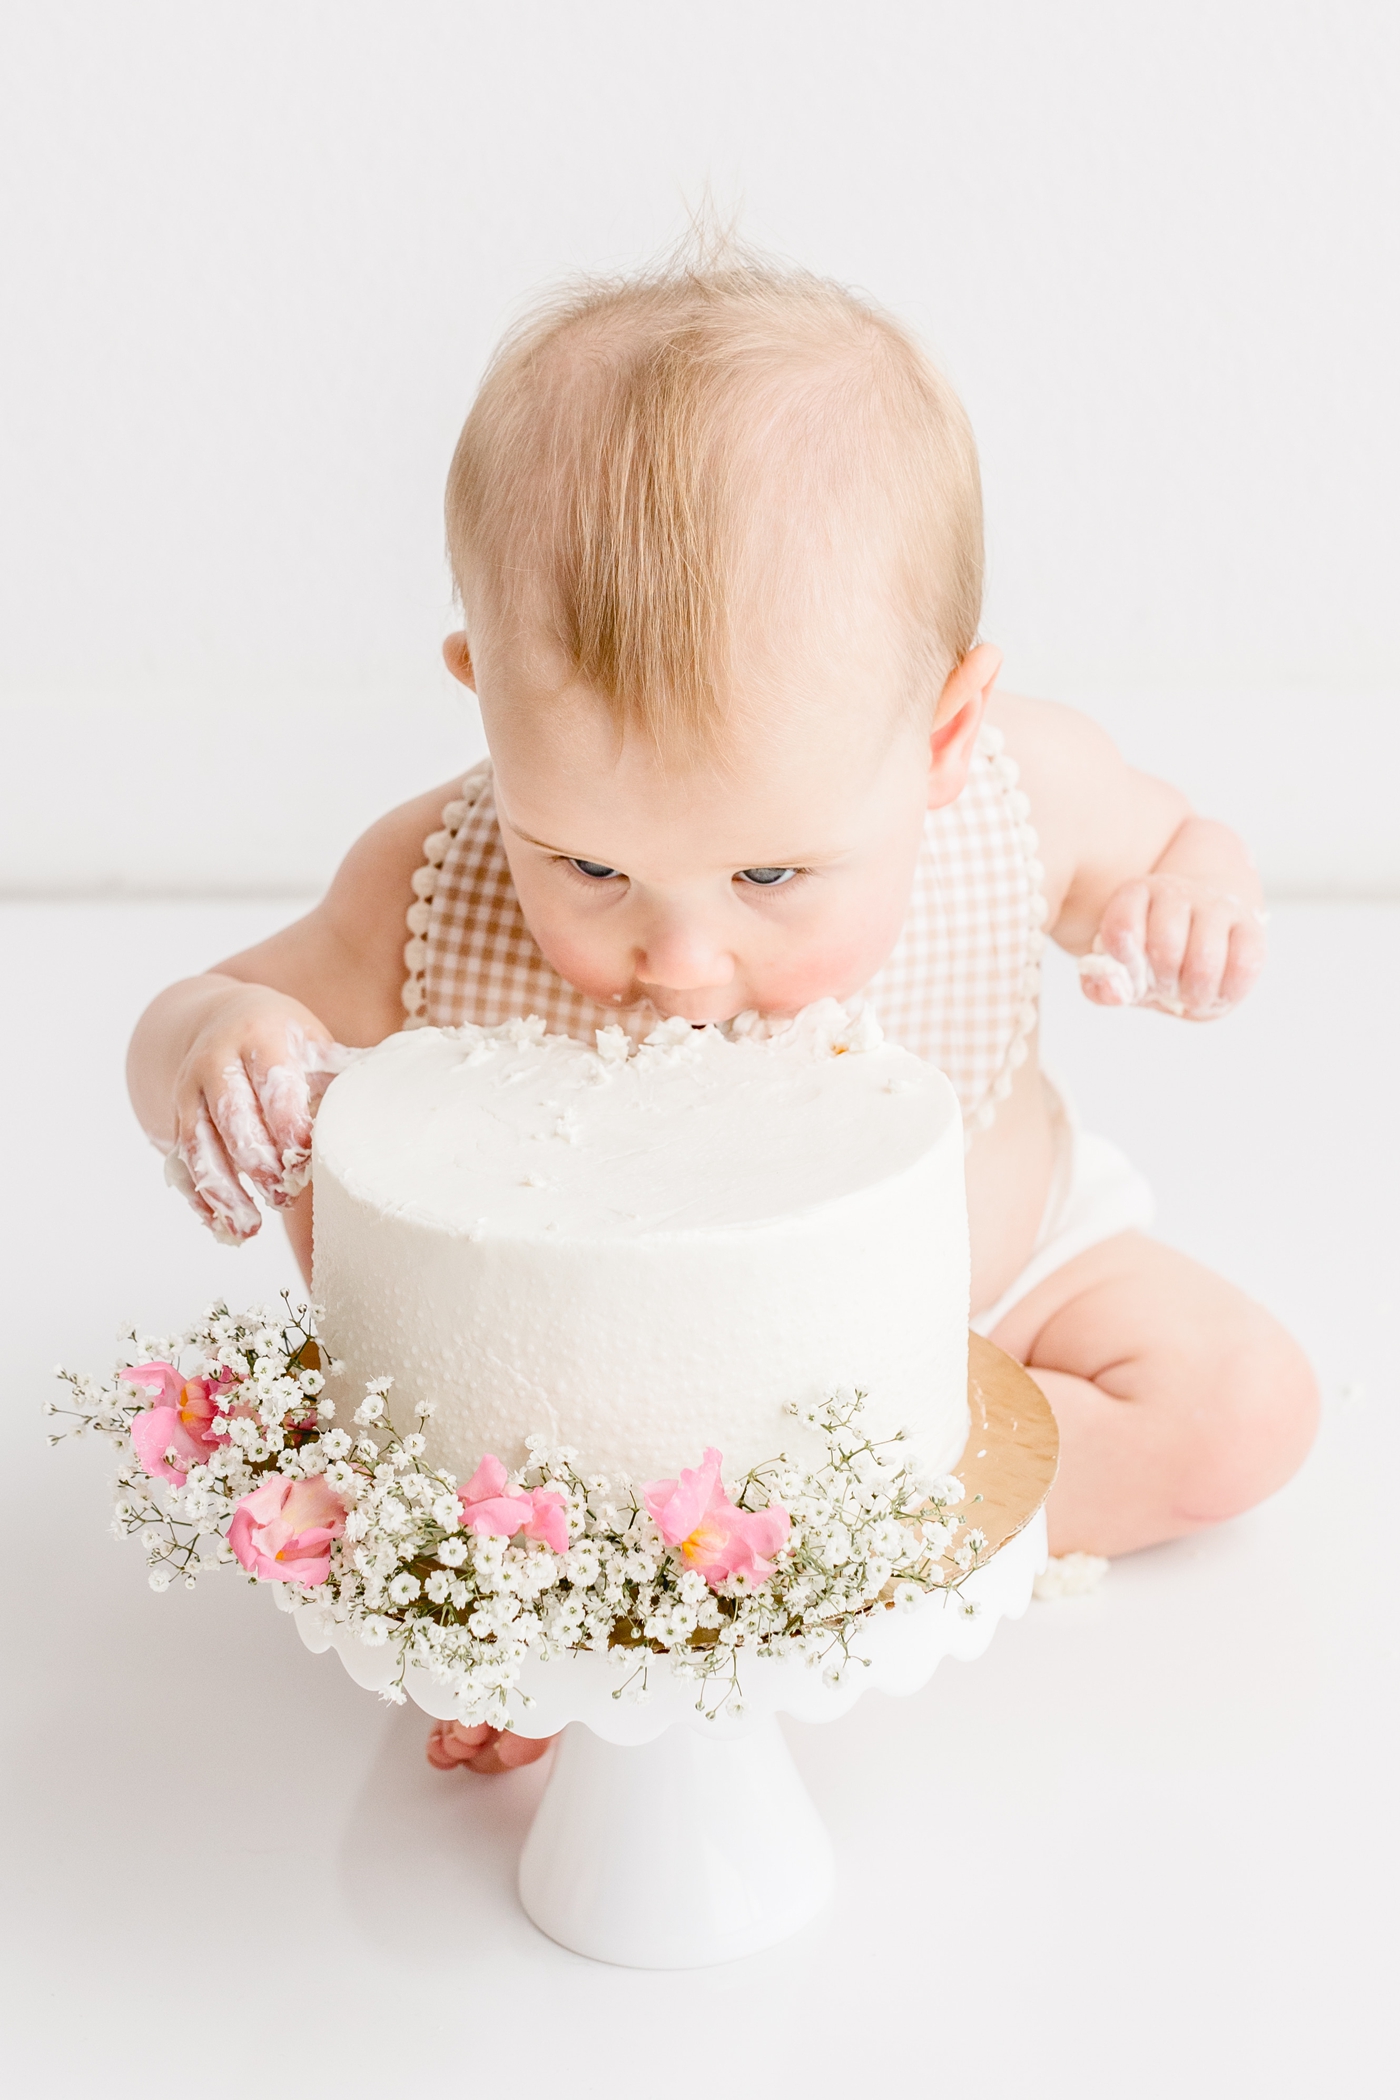 Baby girl taking a bite of her cake with florals on it during first birthday photo session. Photo by Sana Ahmed Photography.